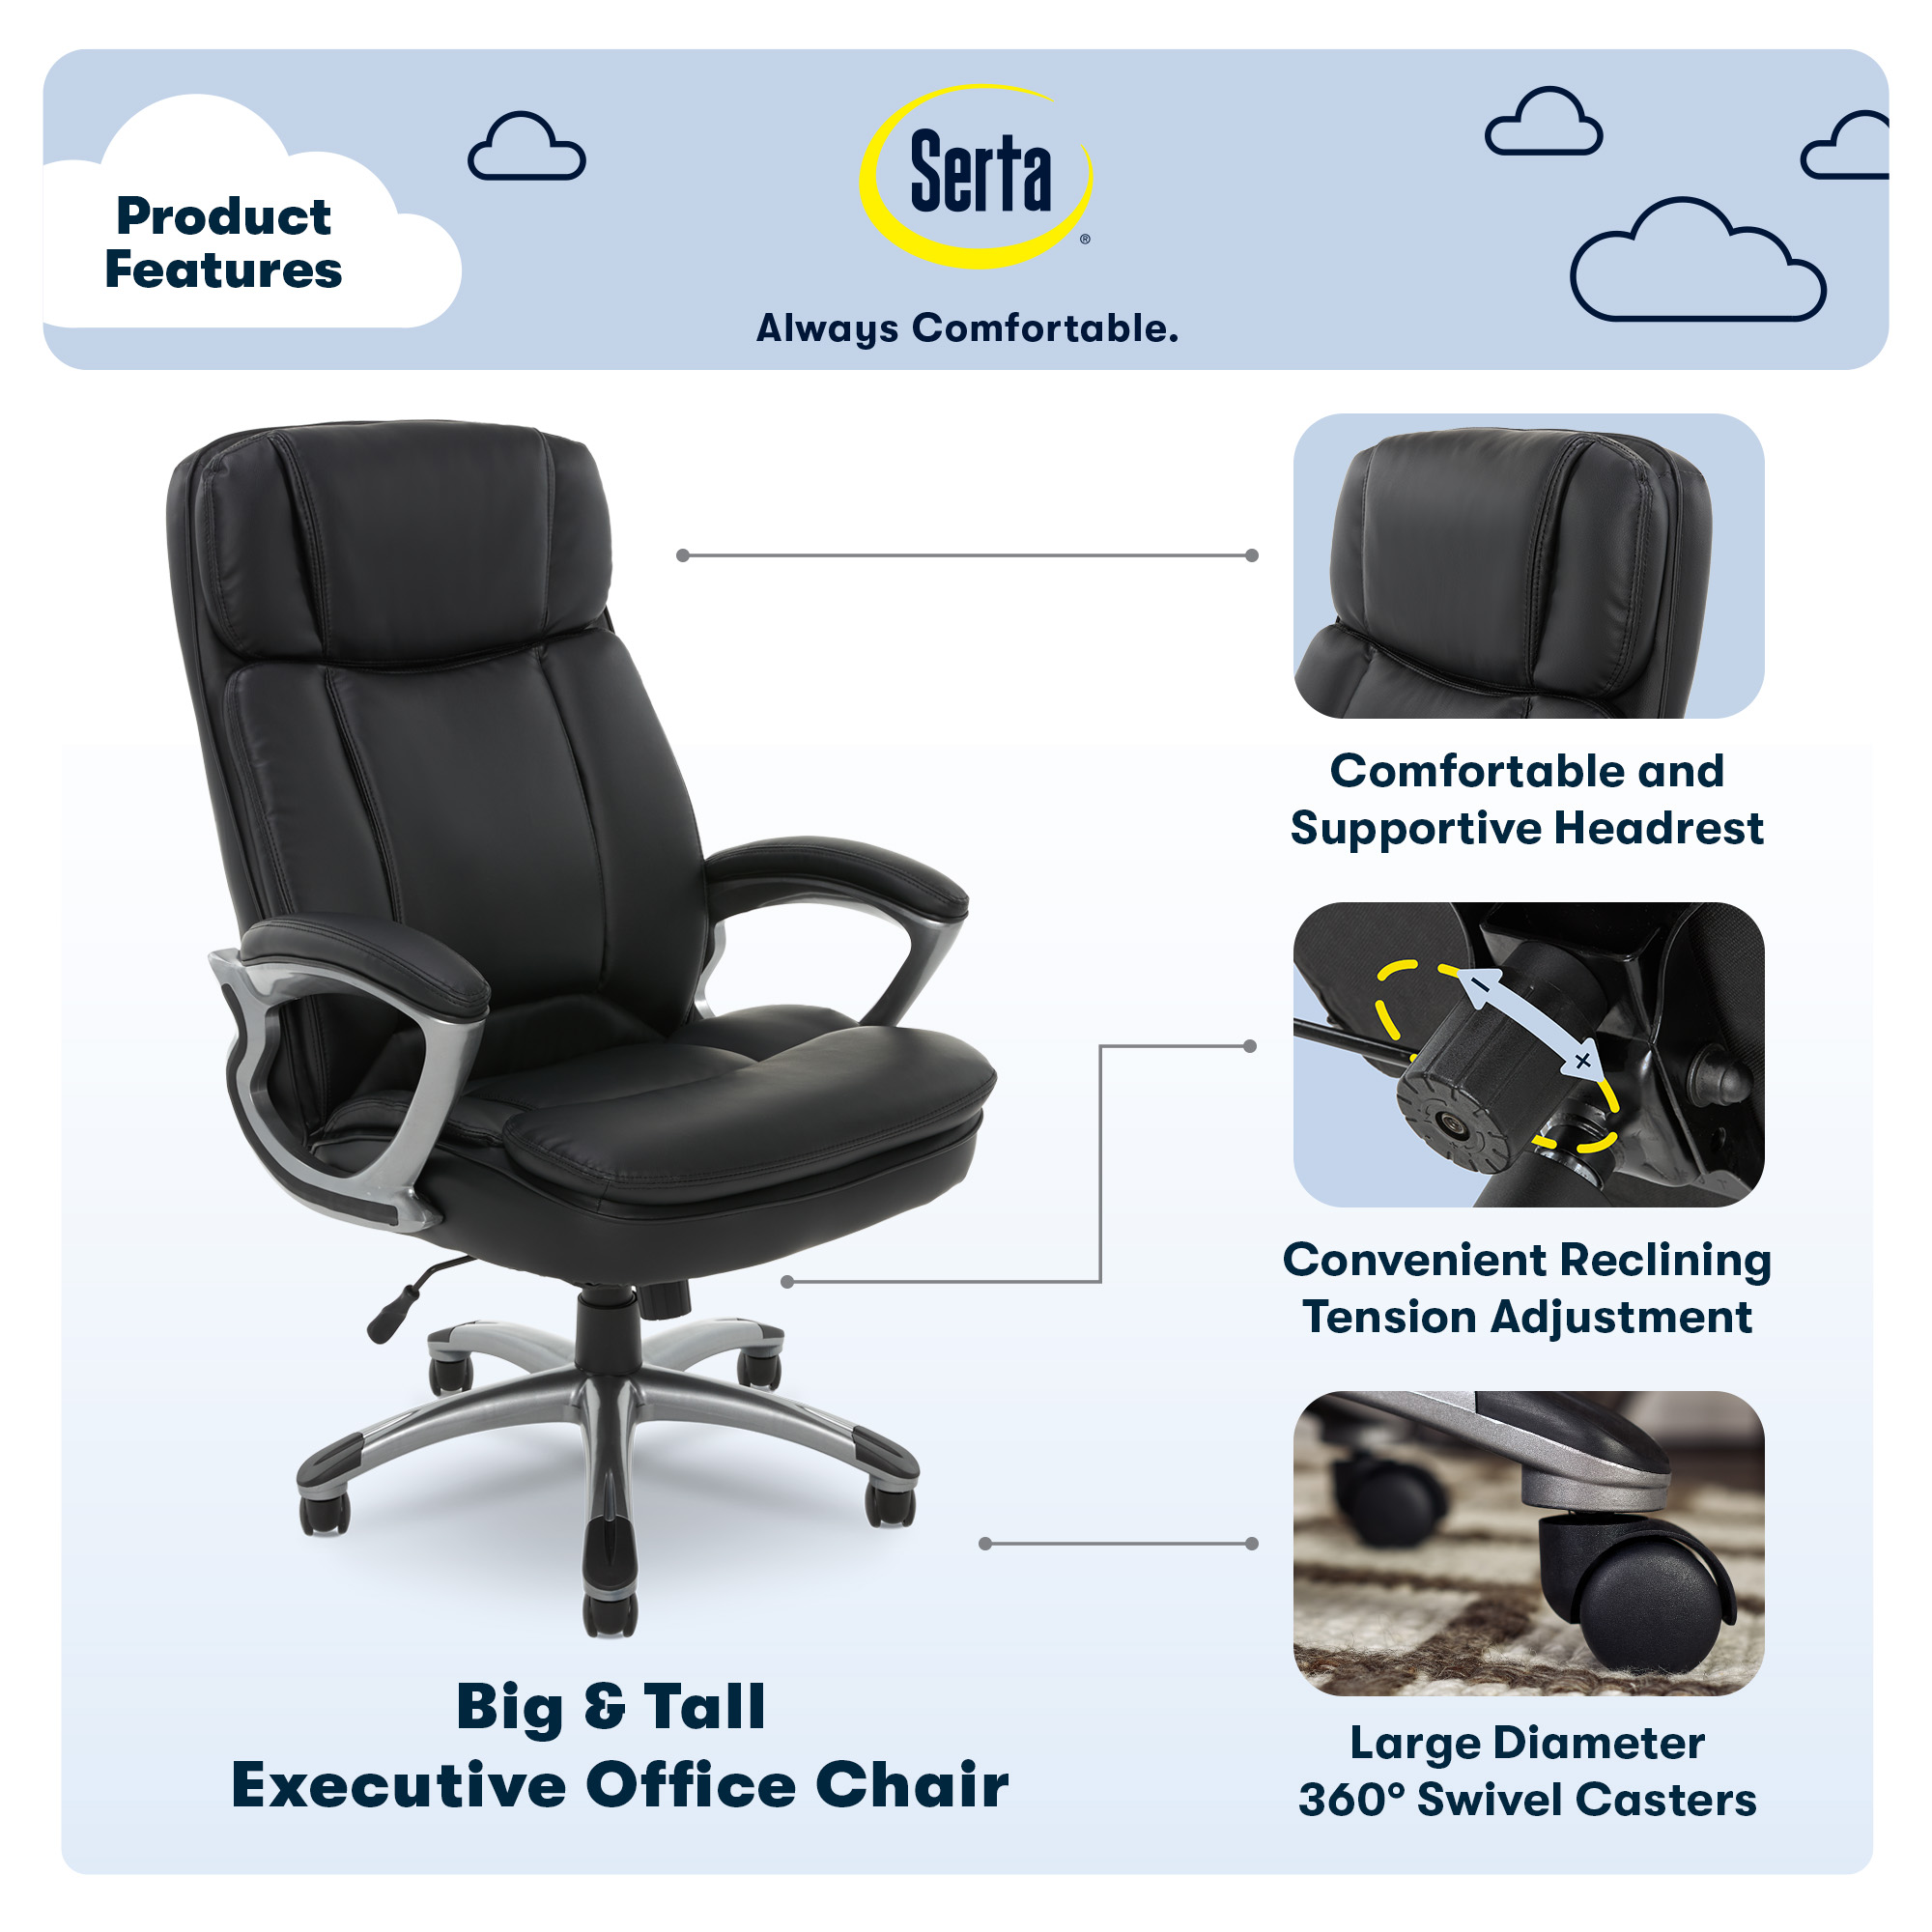 Serta Puresoft Faux Leather Big and Tall Executive Office Chair, Black - image 4 of 22